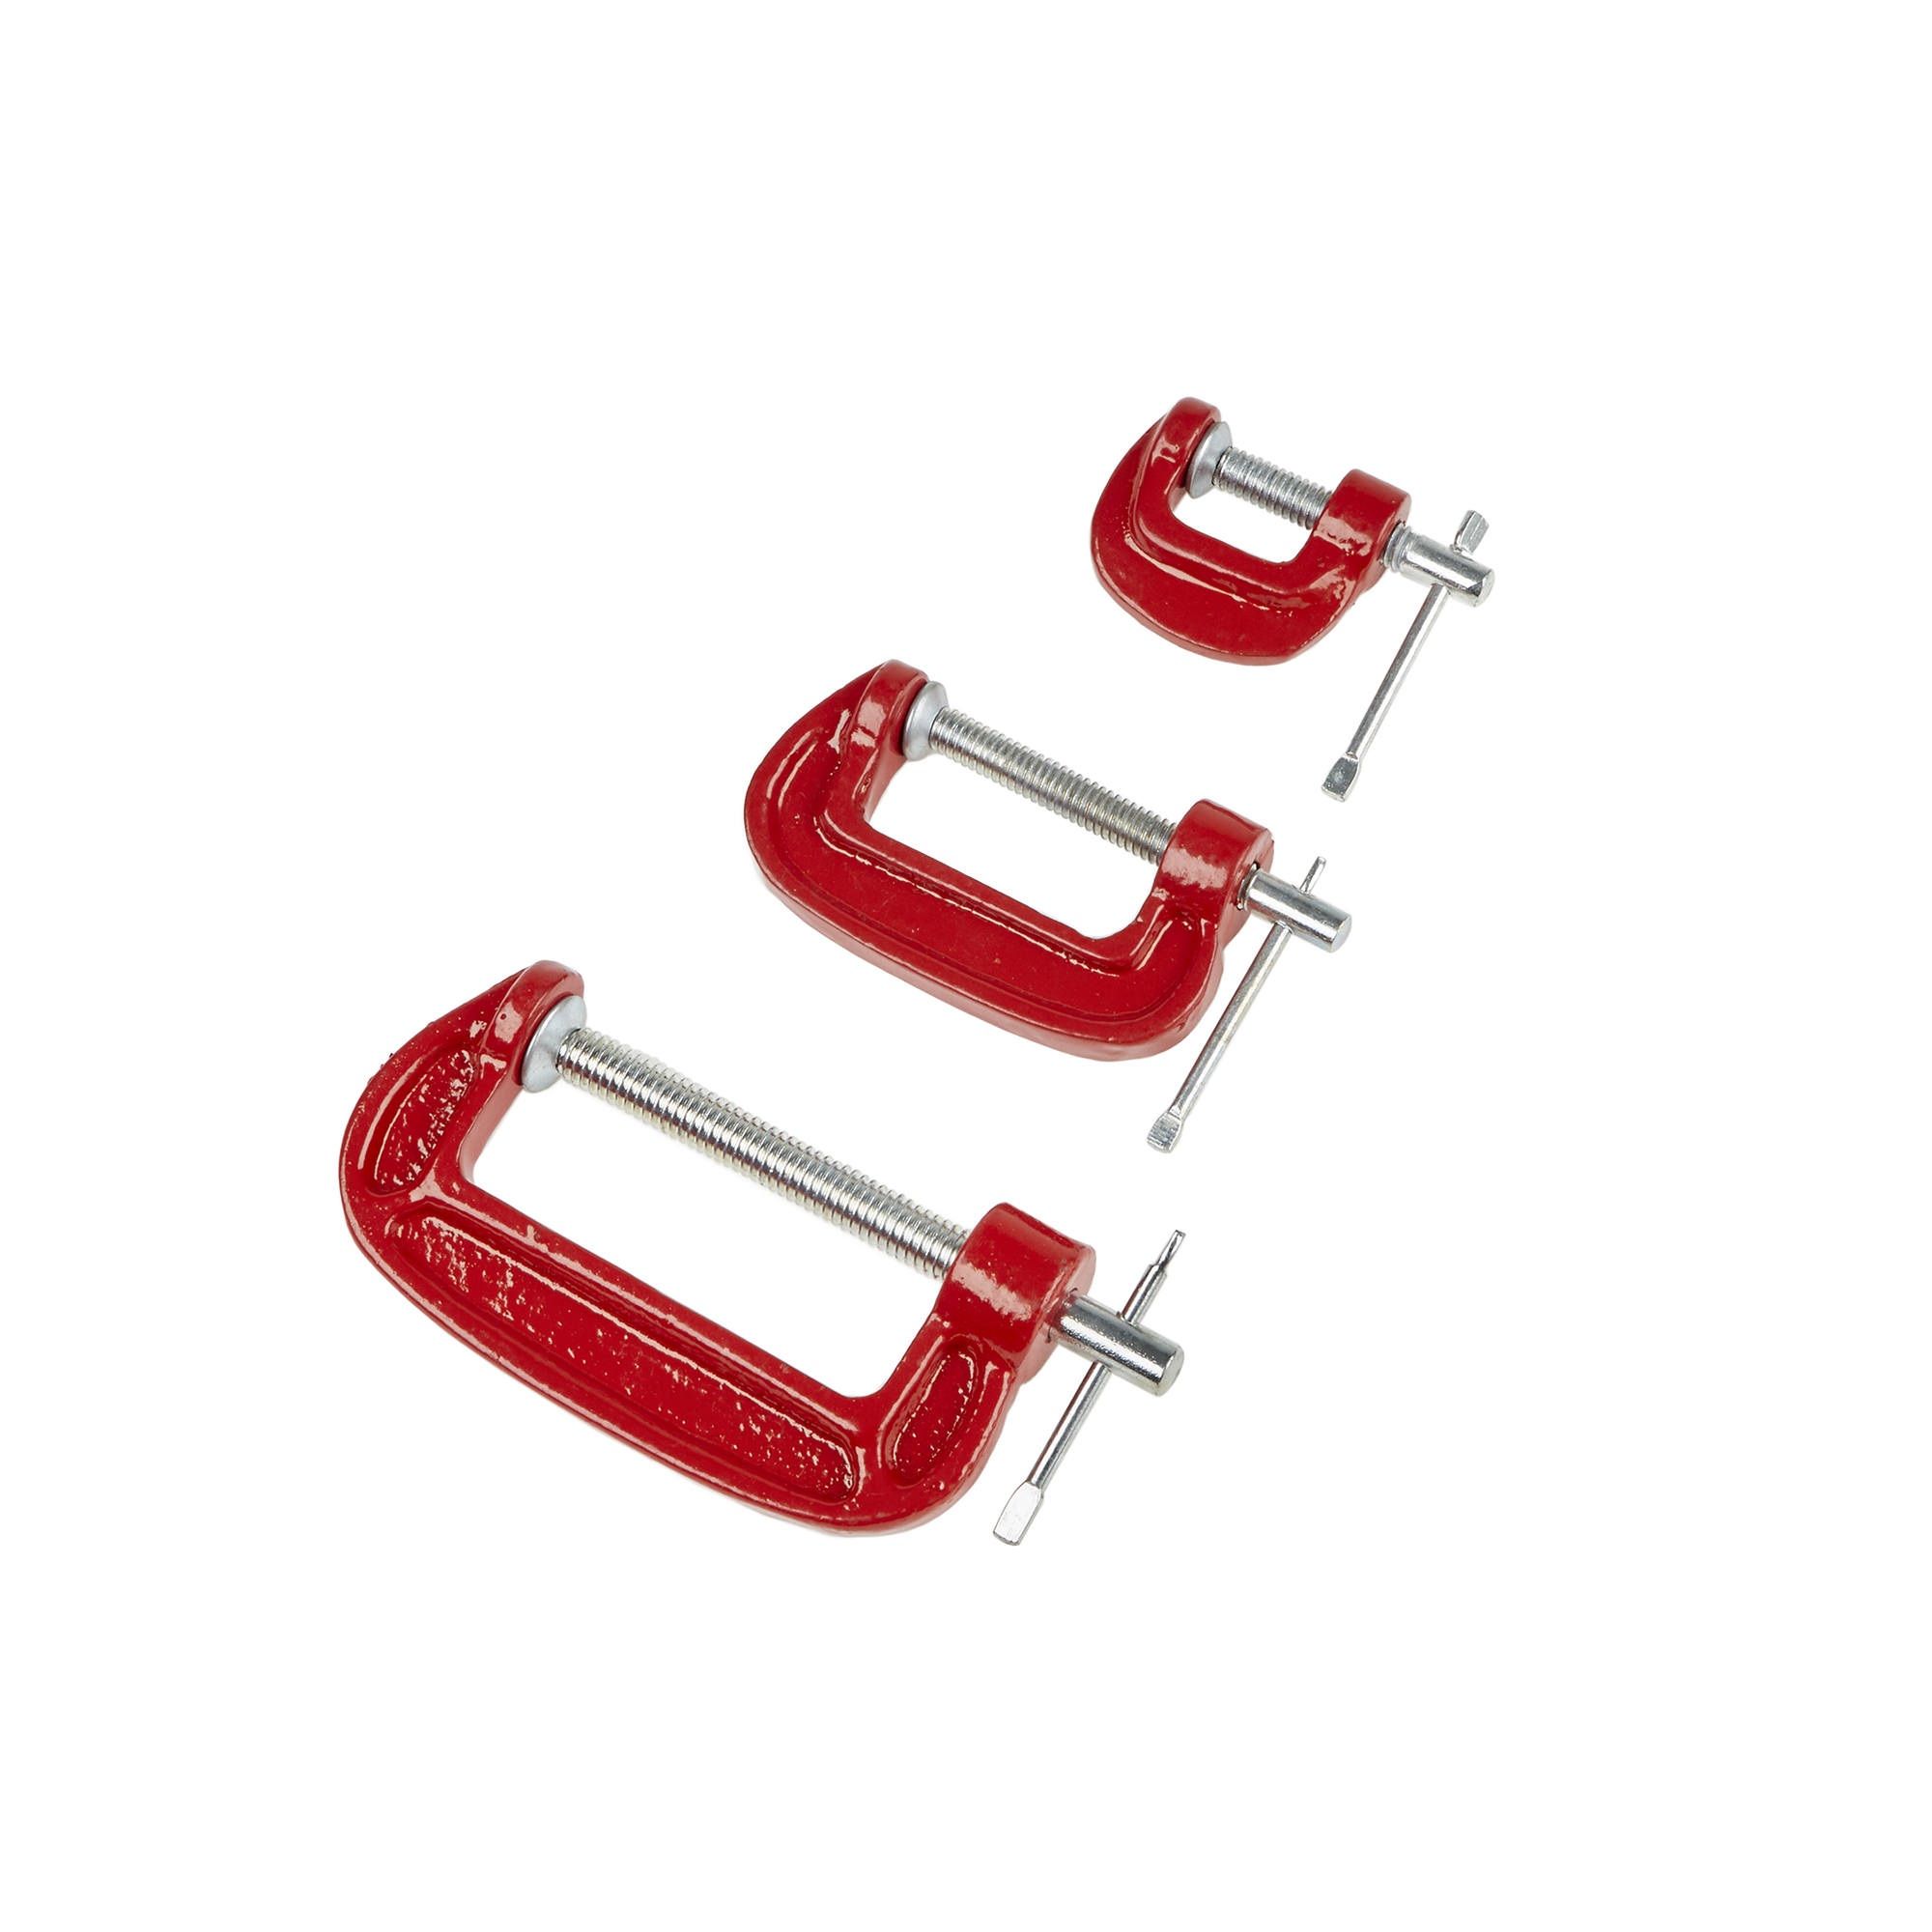 G Clamps pack of 6